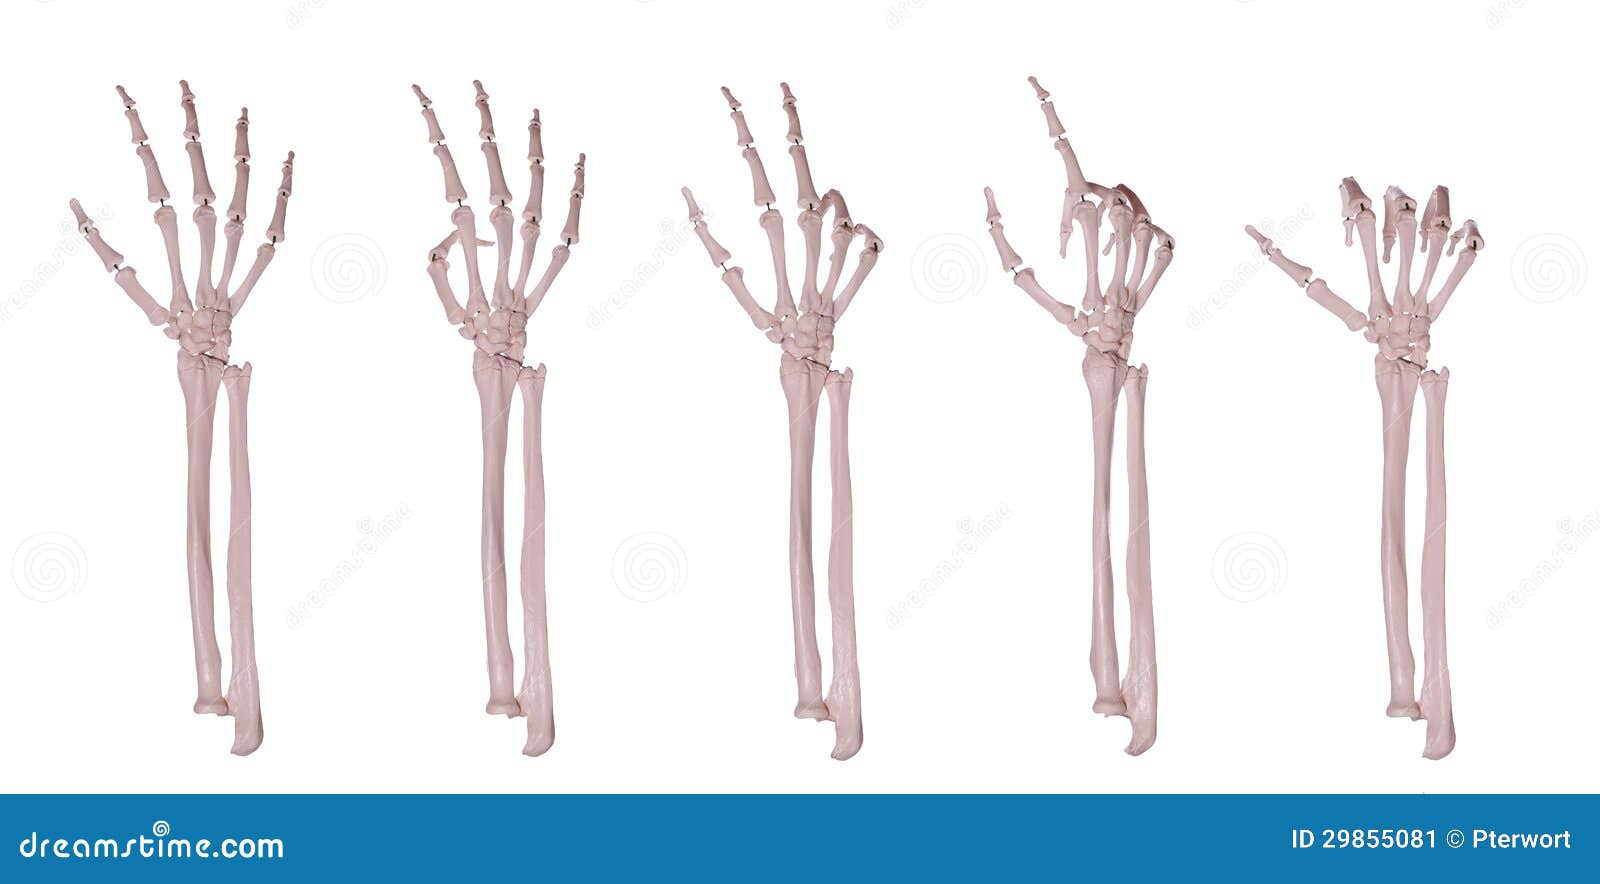 skeleton hands counting 1-5